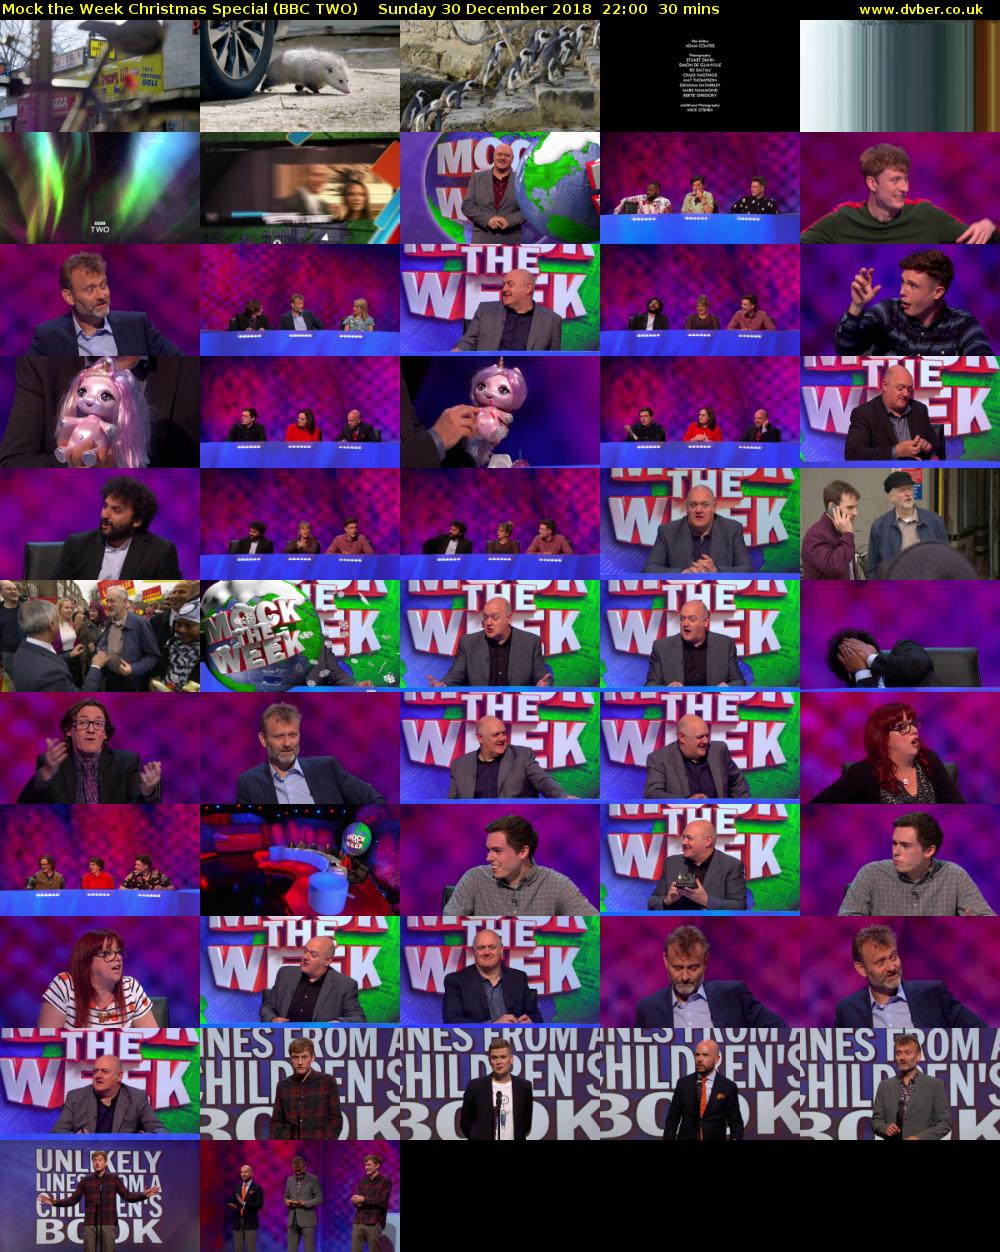 Mock the Week Christmas Special (BBC TWO) Sunday 30 December 2018 22:00 - 22:30